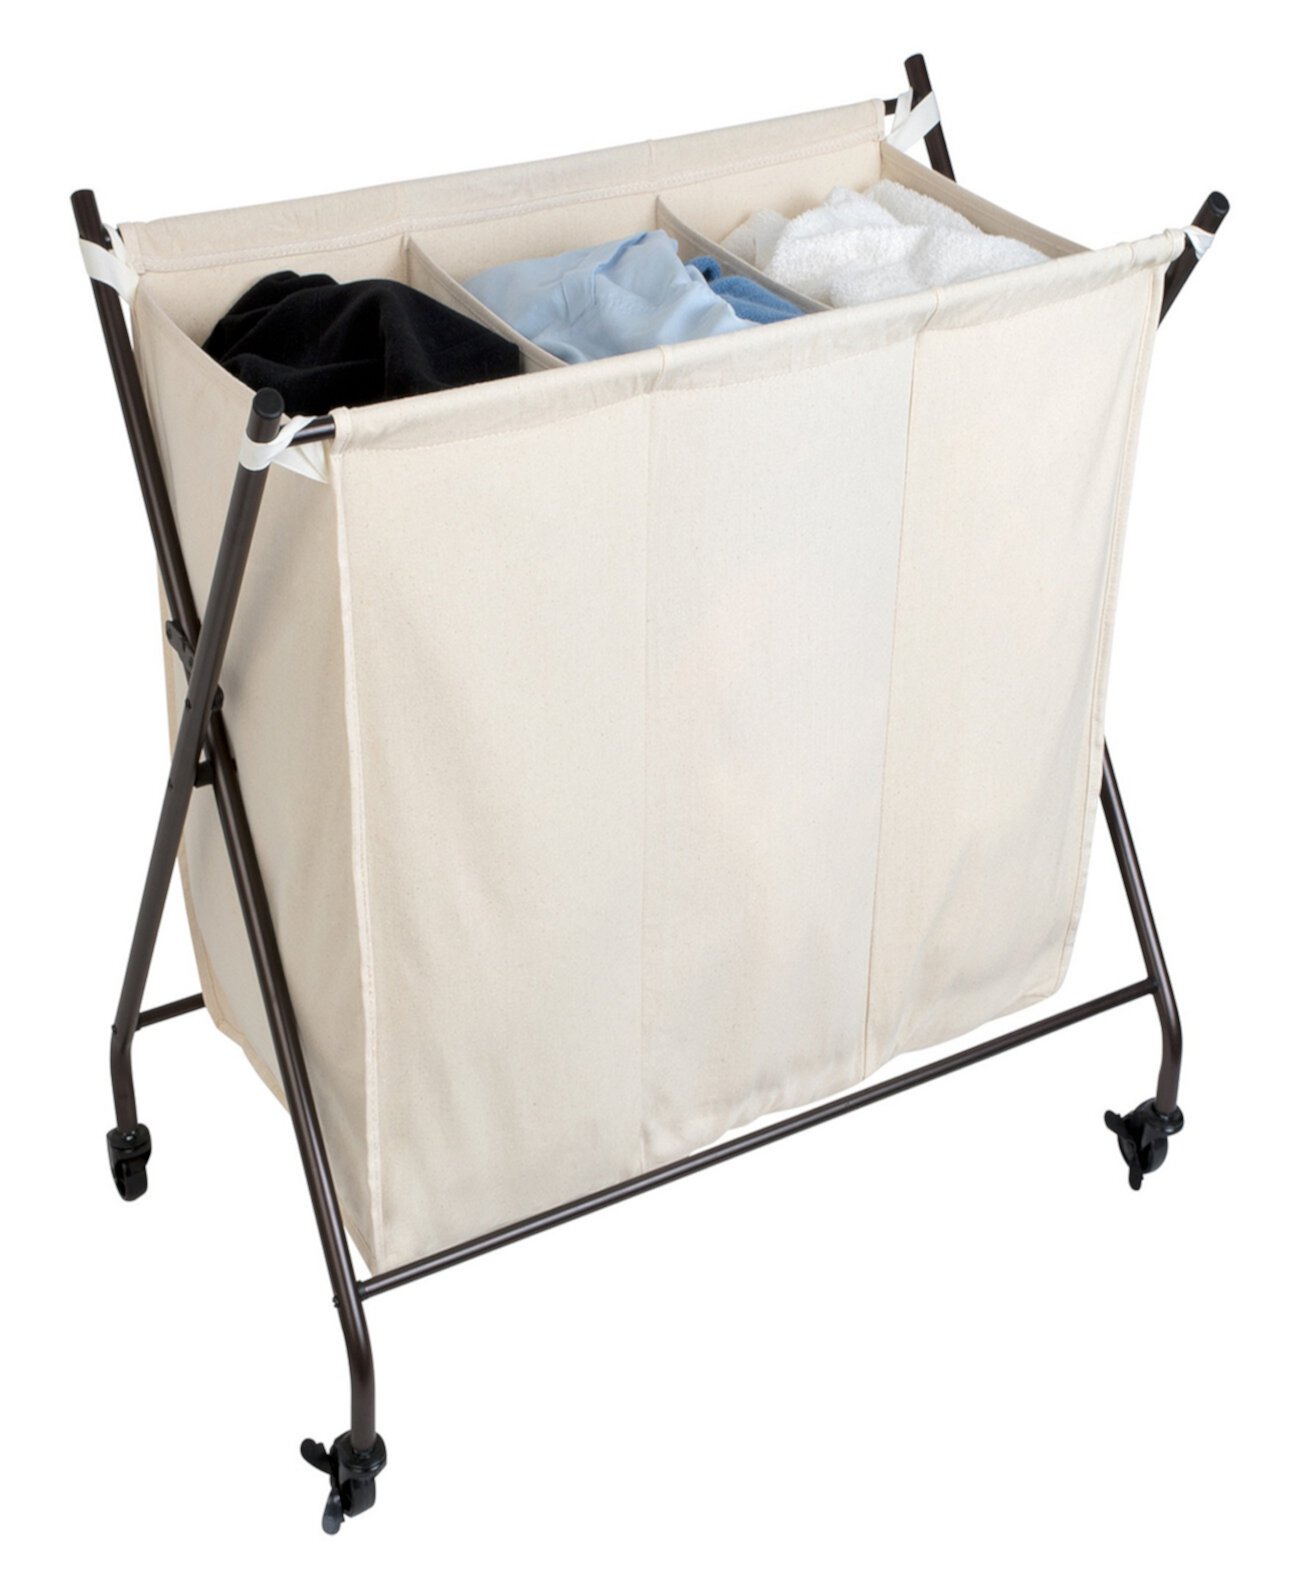 Premium 3 Compartment Rolling Canvas Laundry Sorter Hamper with Wheels and Handles Smart Design